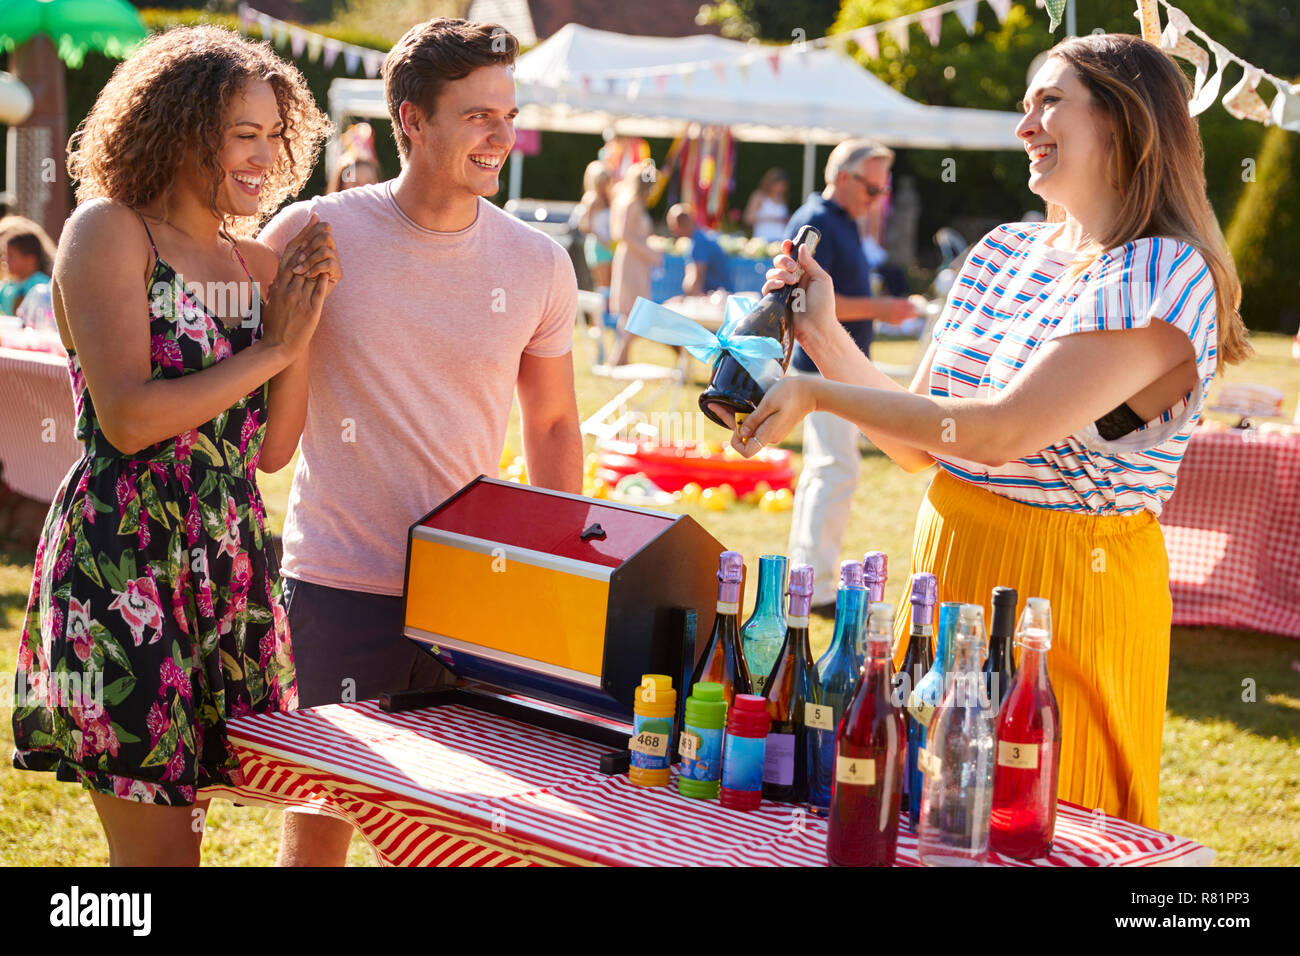 Couple Winning Prize At Tombola Stall At Busy Summer Garden Fete Stock Photo